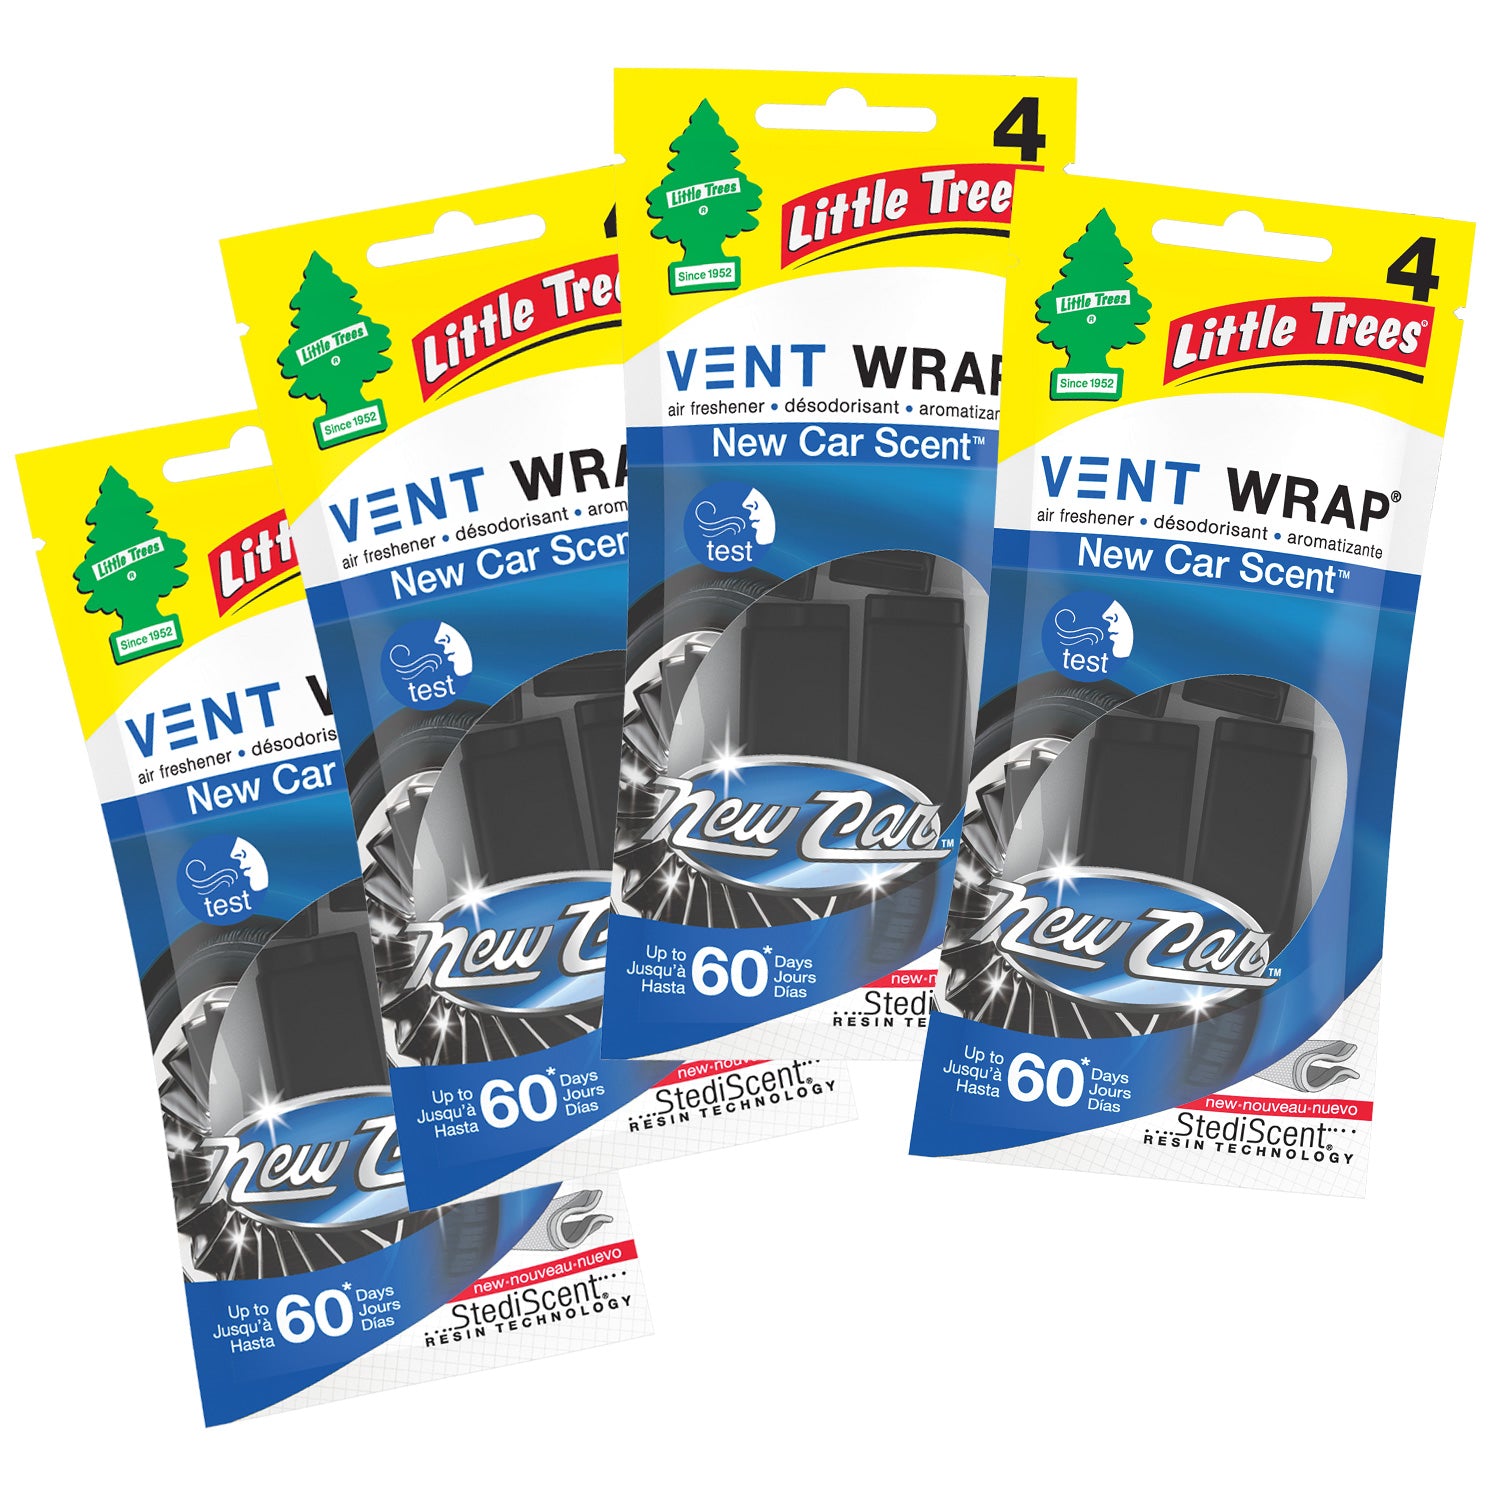 Little Trees Vent Wrap Air Freshener 4 Packs New Car Scent By Goso Direct